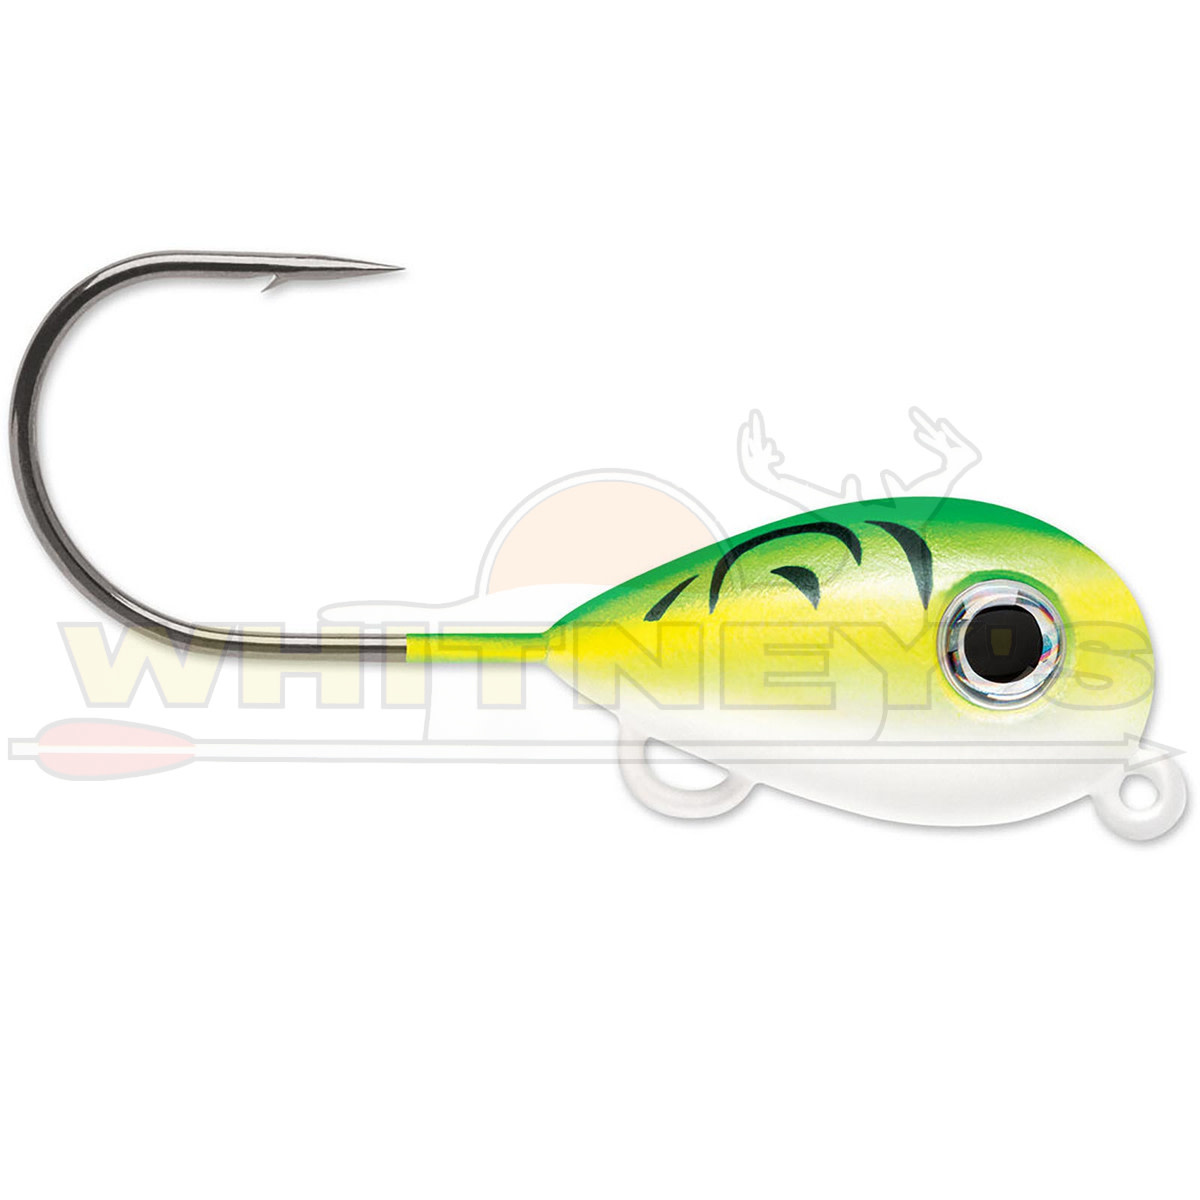 Rapala Hover Jig #2 - Whitney's Hunting Supply